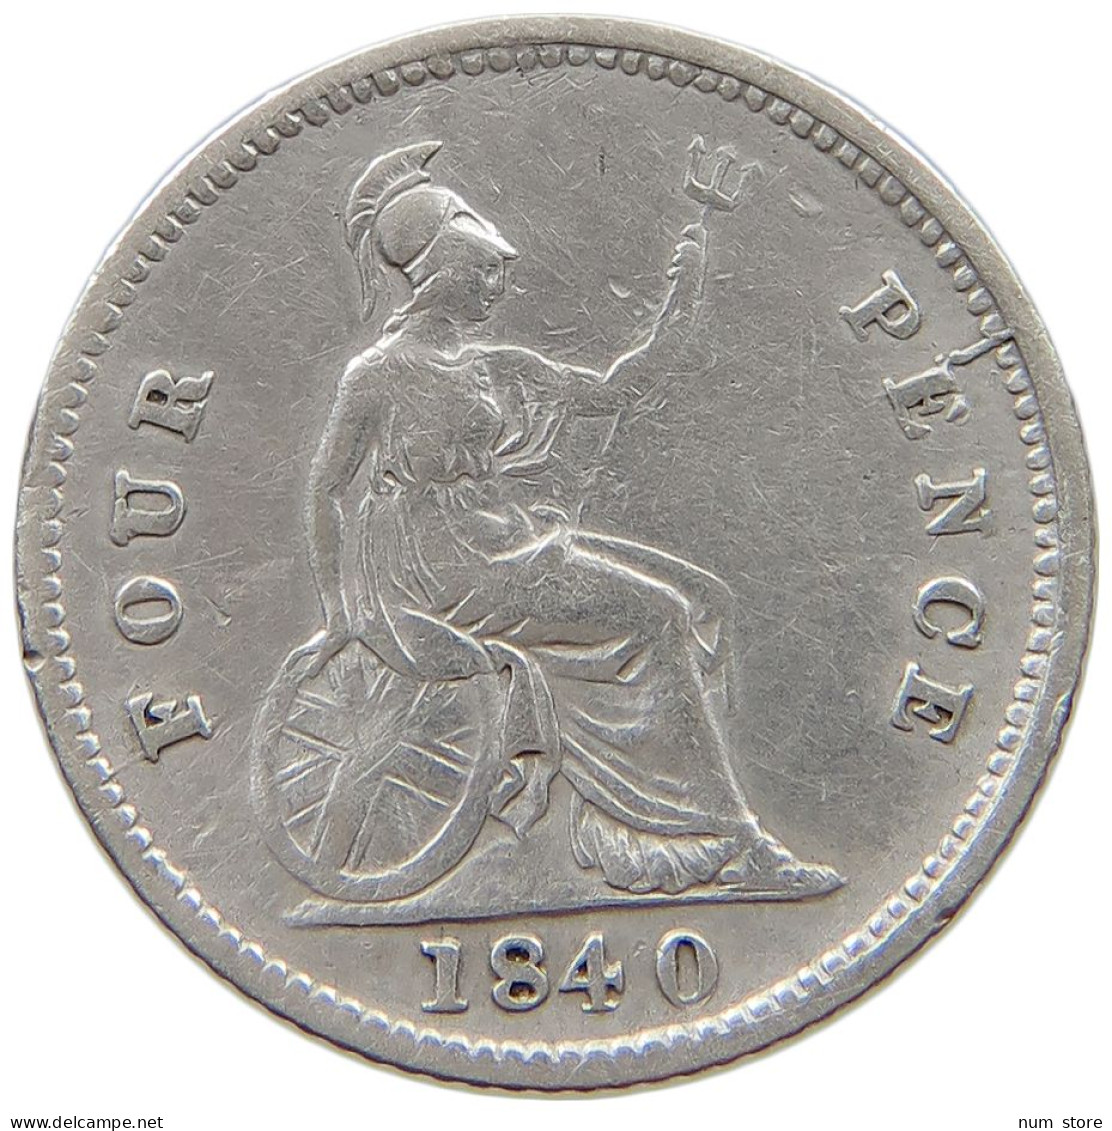 GREAT BRITAIN FOURPENCE 1840 Victoria 1837-1901 #t148 0863 - G. 4 Pence/ Groat